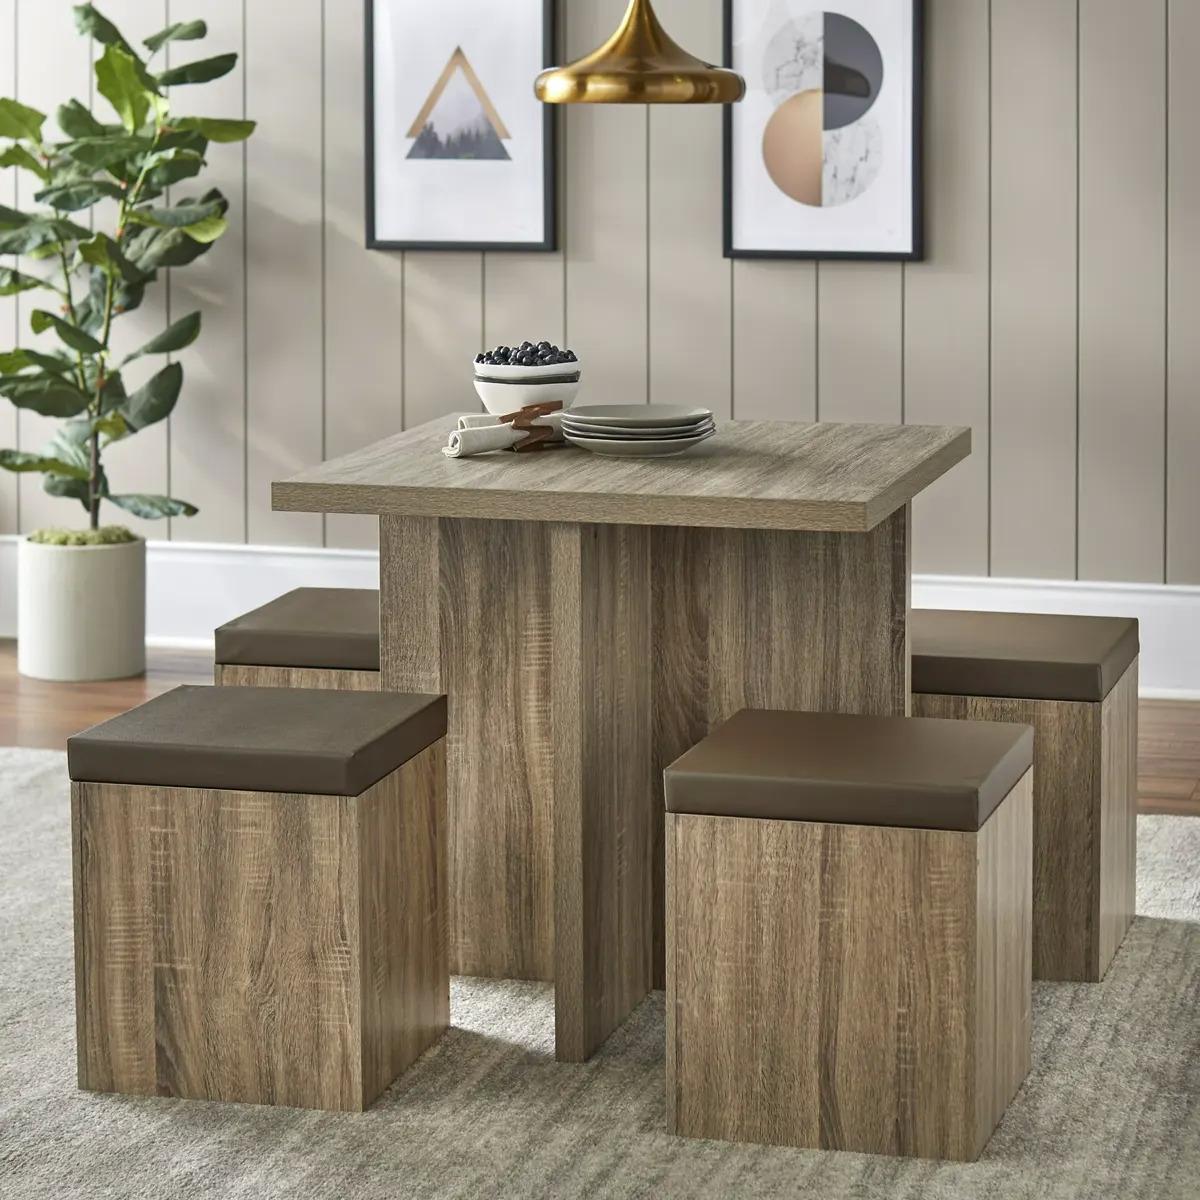 5-Piece Mainstays Dexter Dining Set for $169 Shipped